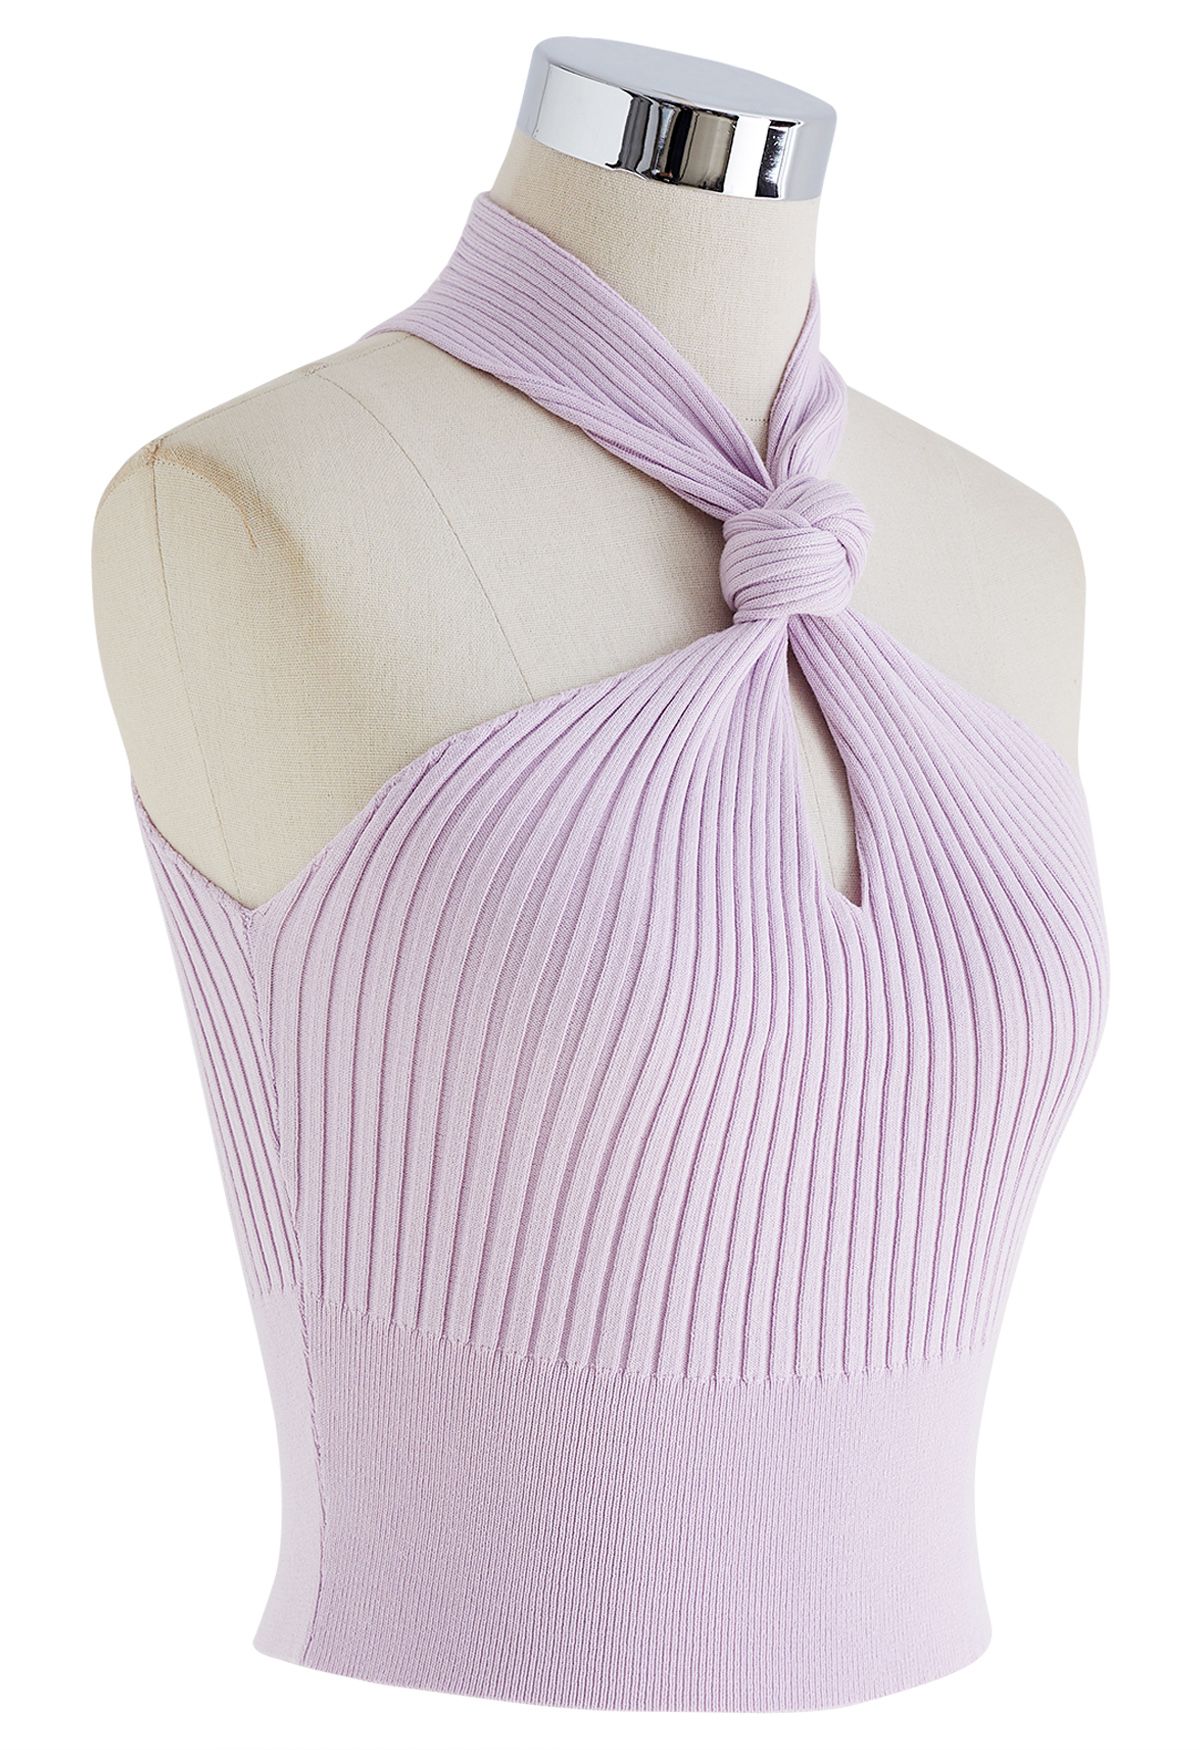 Knot Halter Neck Knit Crop Top in Lilac